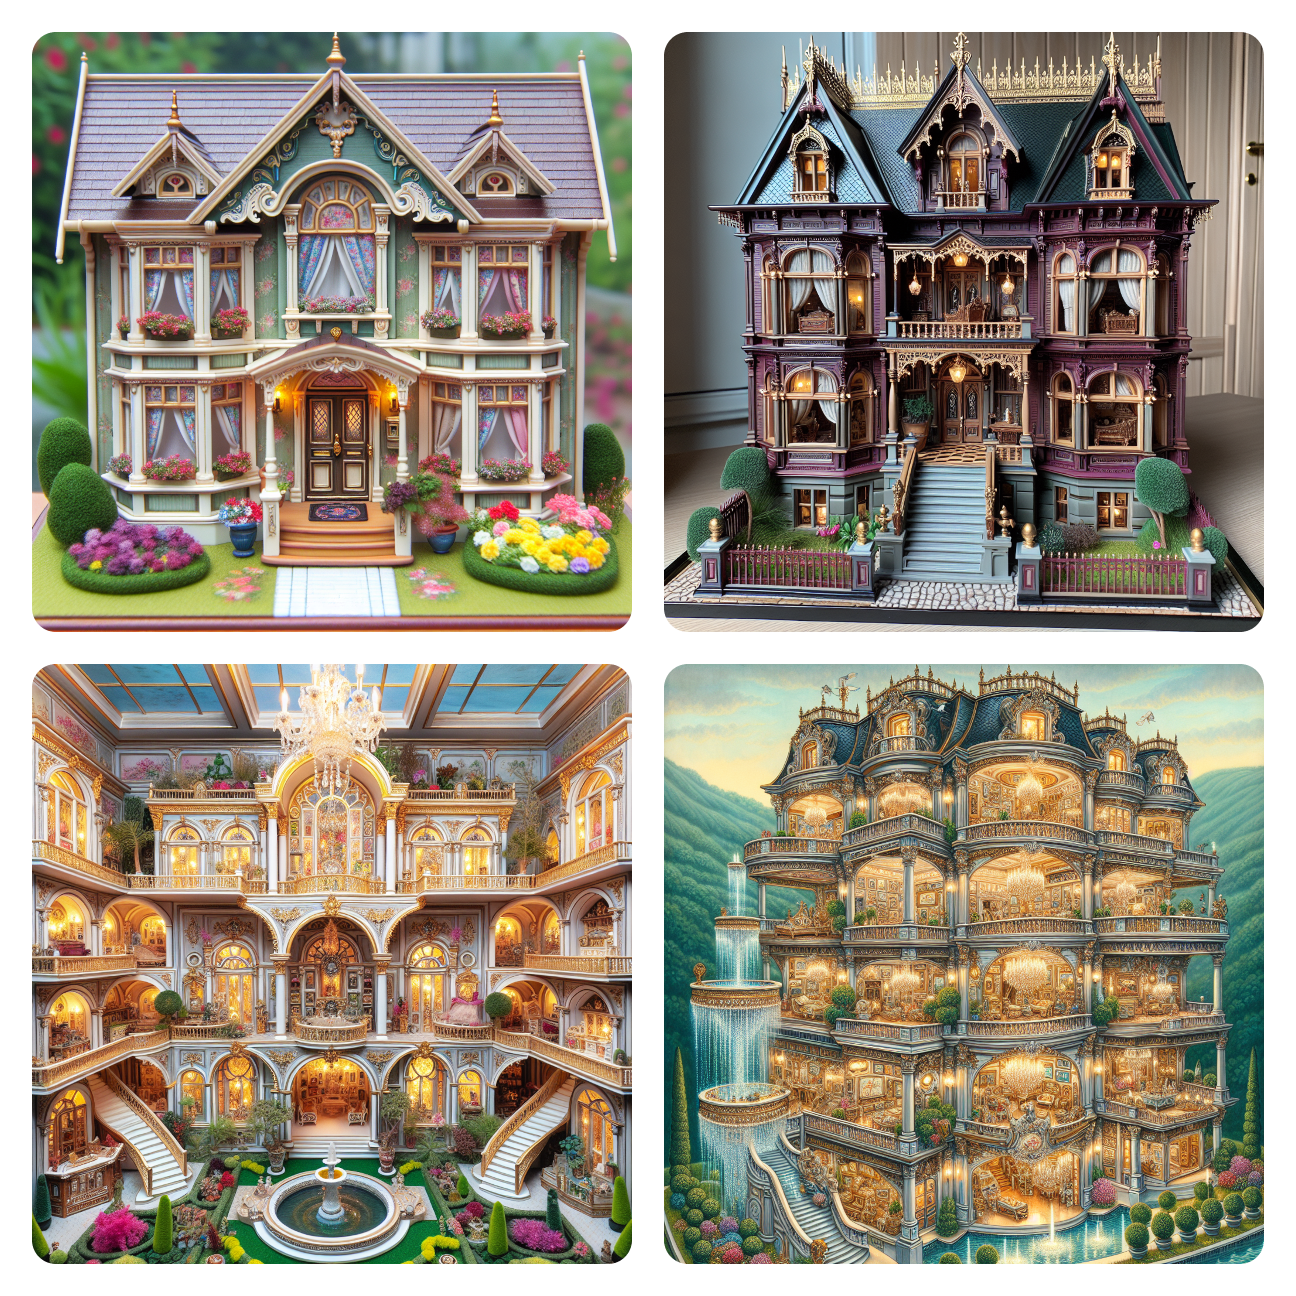 Image: From Manors to Castles: Dollhouse Deluxe